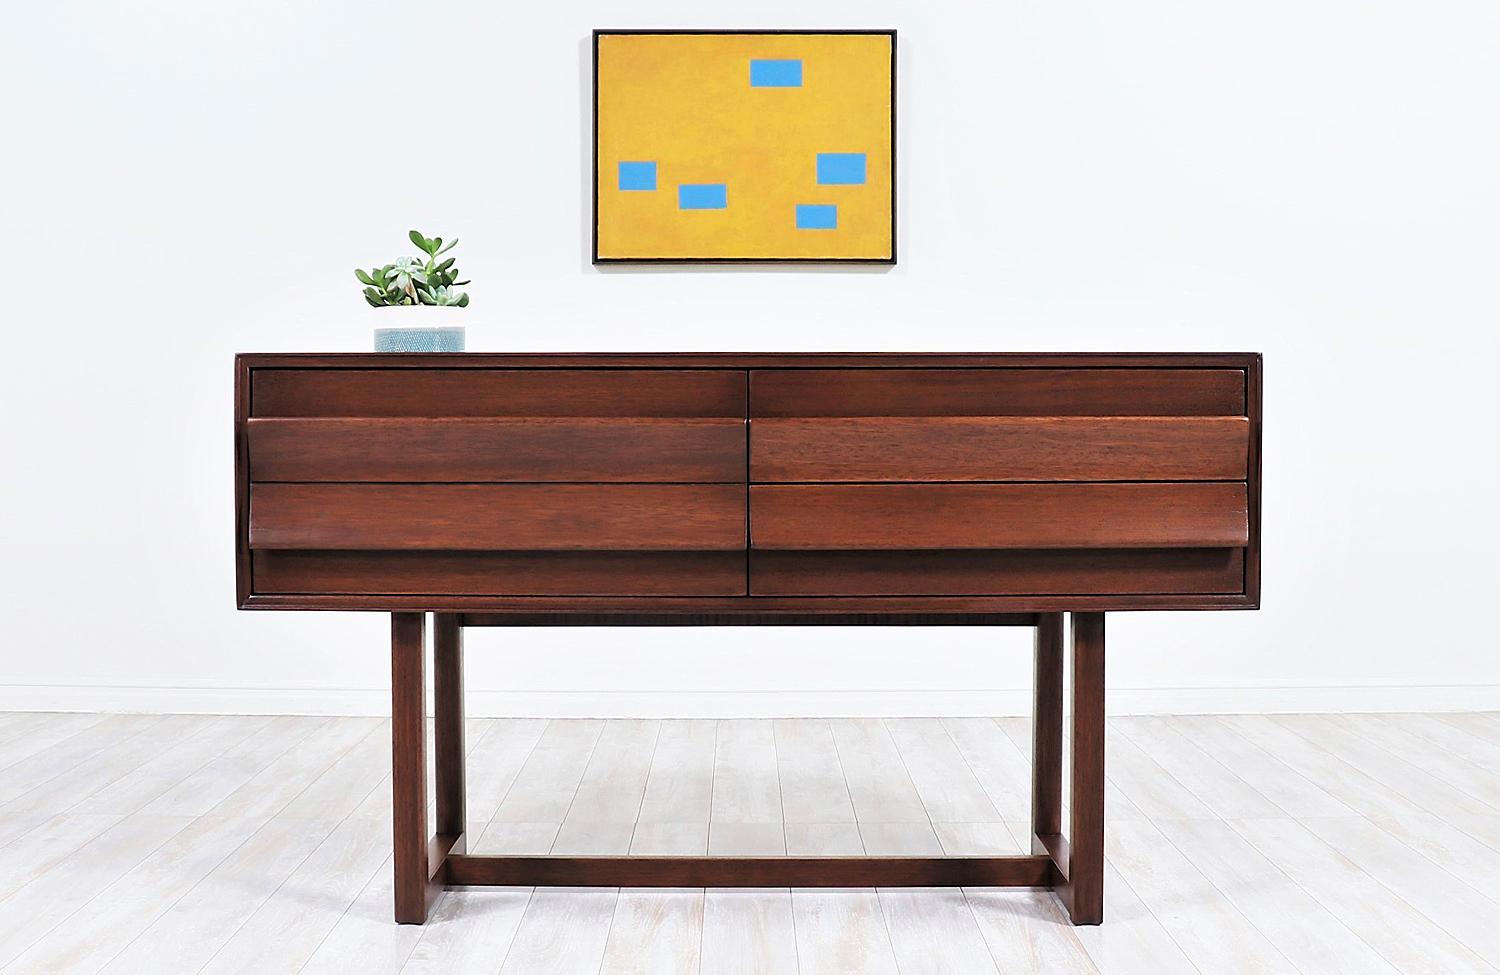 Sleek and curvature console table designed by fame Hungarian-born modern architect and interior designer Paul Laszlo. This example was designed in collaboration with California company, Brown Saltman, who operated in the city of Los Angeles in the